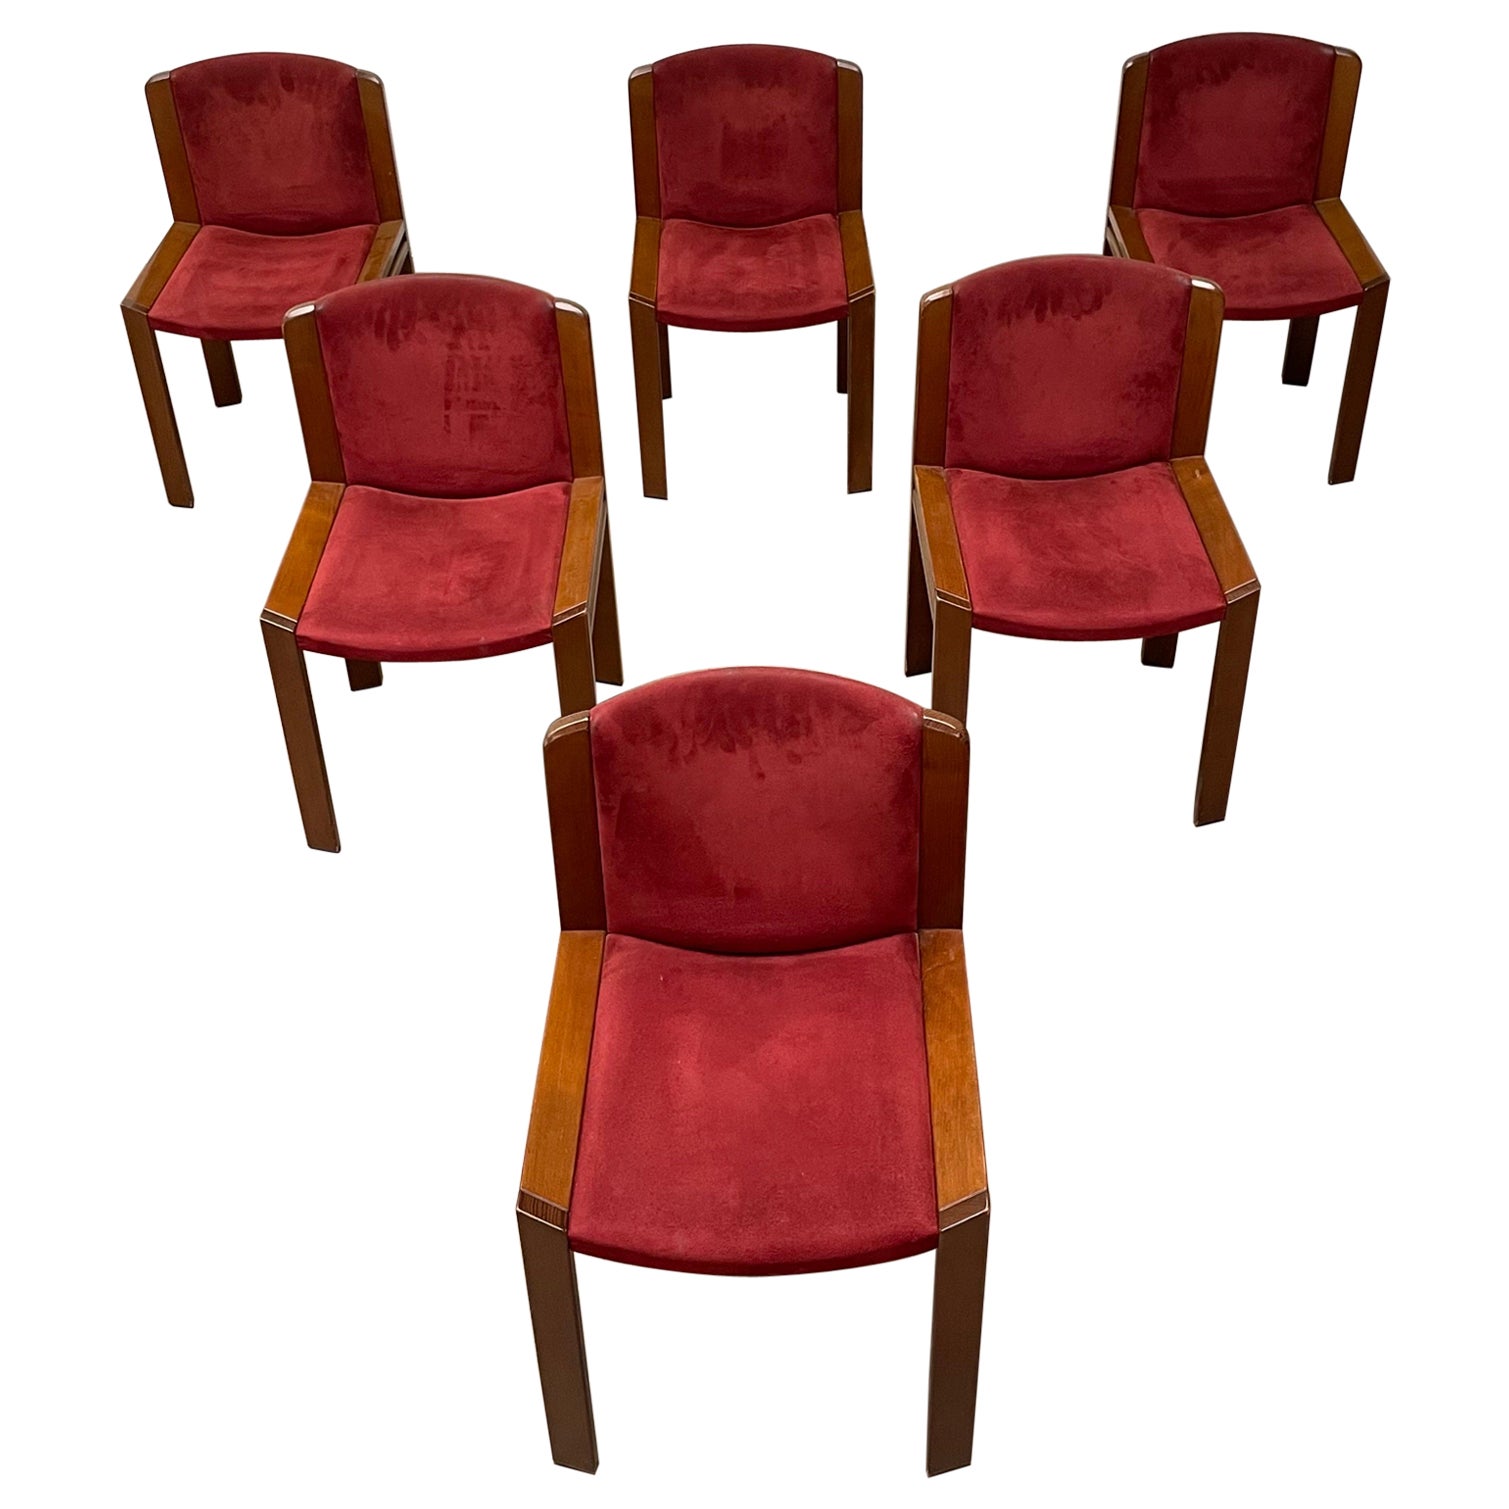 Set of Six '300' Dining Chairs by Joe Colombo for Pozzi, 1960s